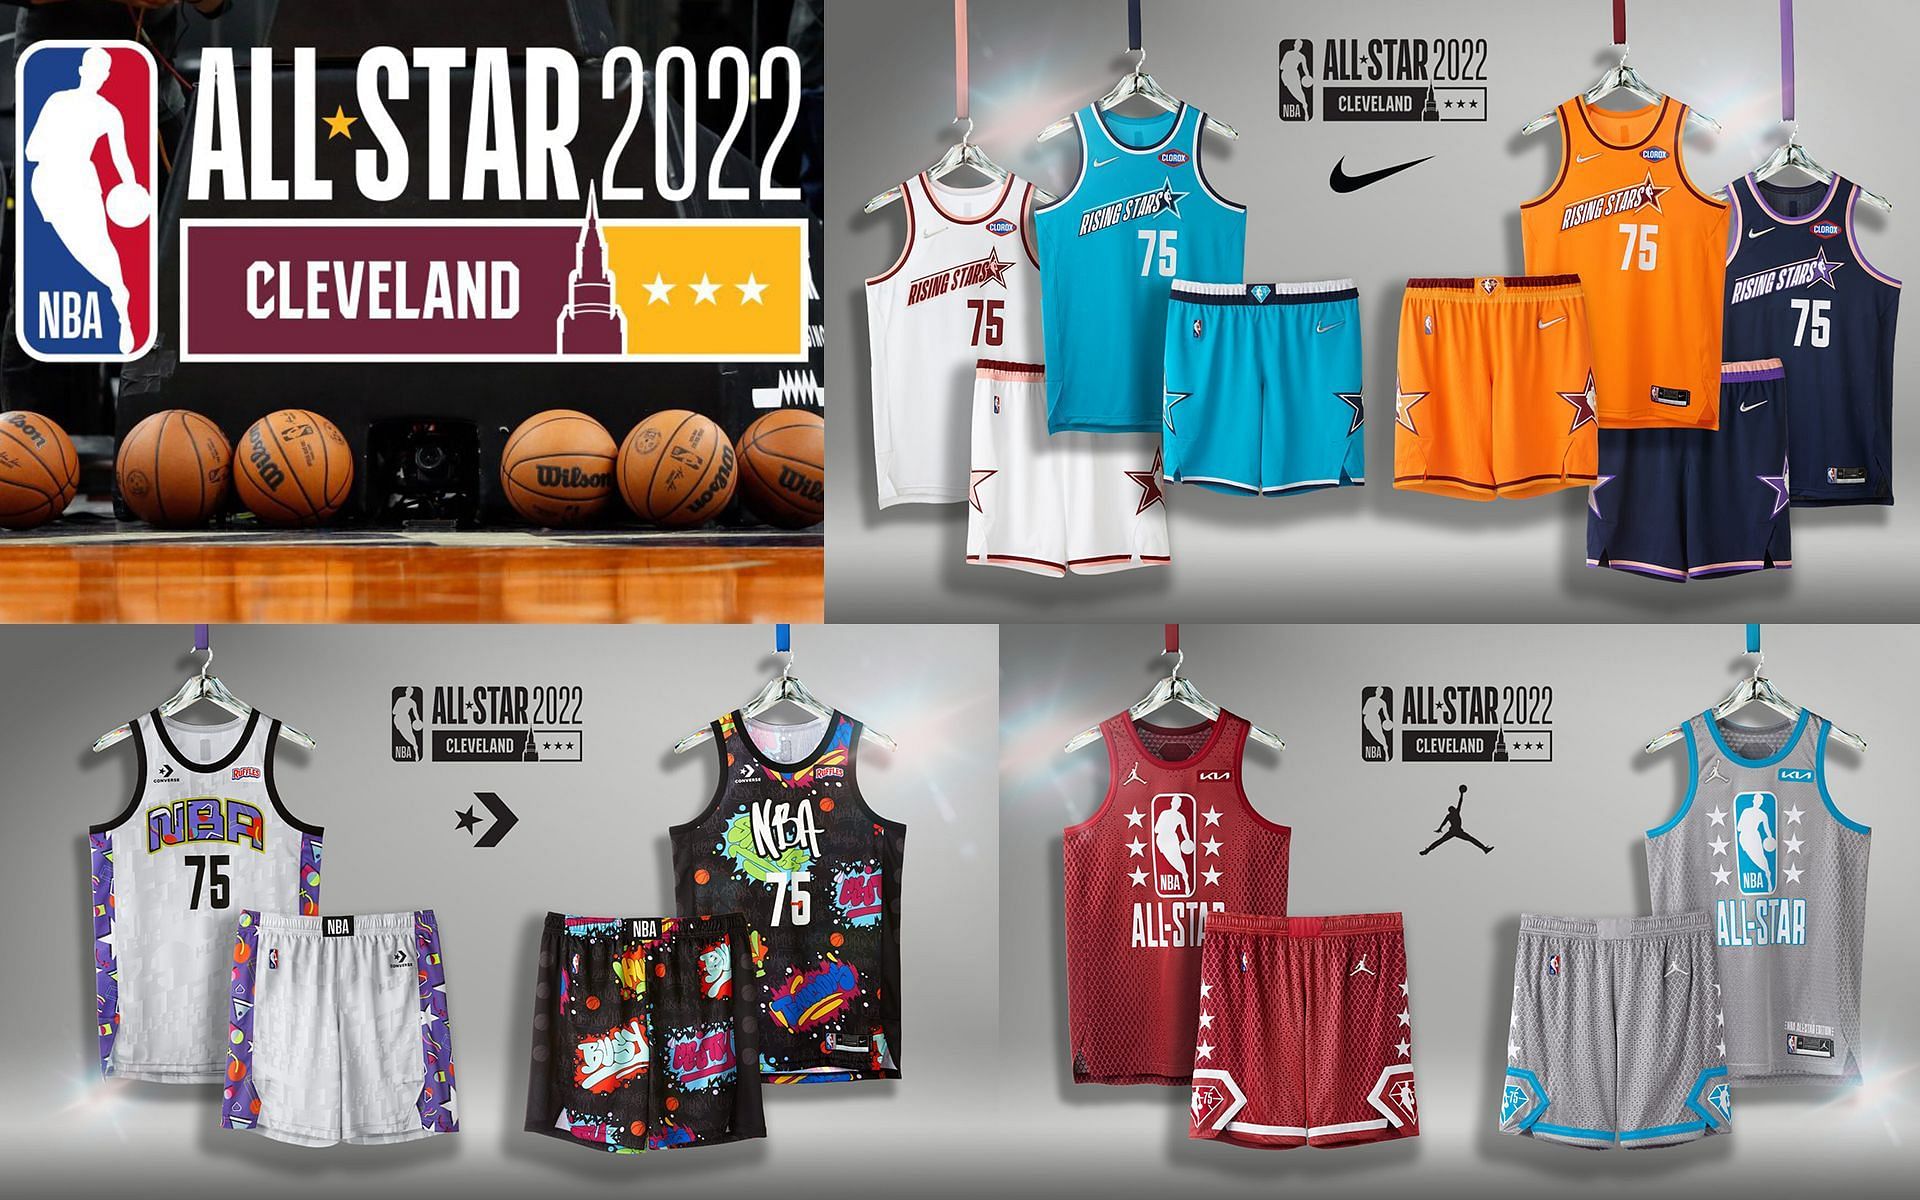 Nike X NBA All Star 2022 Uniforms: Where To Buy, Price, Release Date, And More